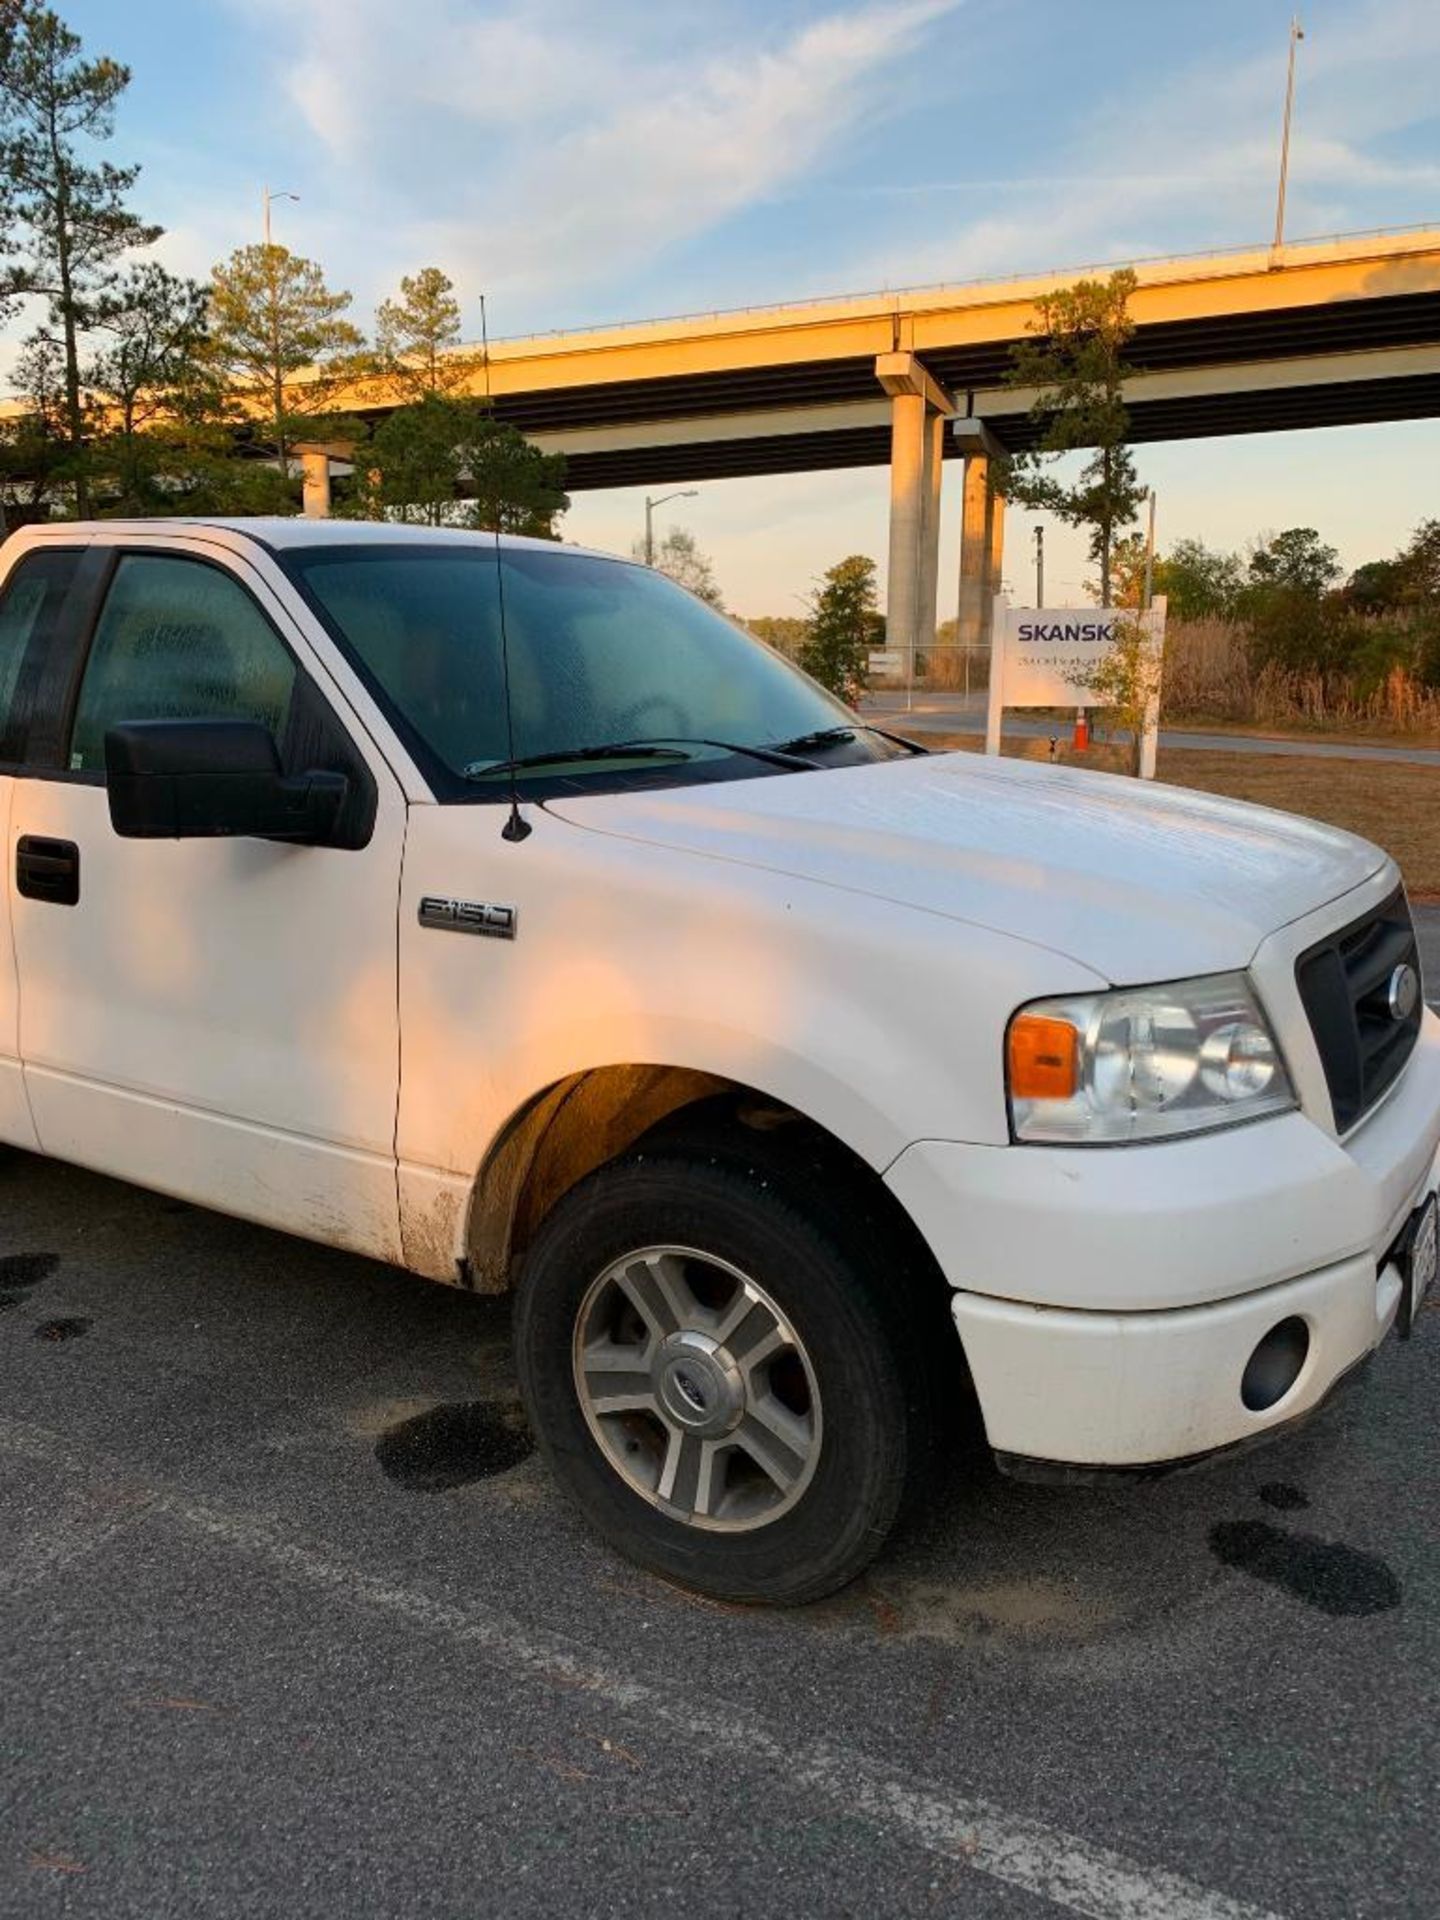 2008 FORD F-150 STX PICK-UP TRUCK, STANDARD CAB, AUTOMATIC TRANSMISSION, 2-WHEEL DRIVE, 70,003 MILES - Image 7 of 9